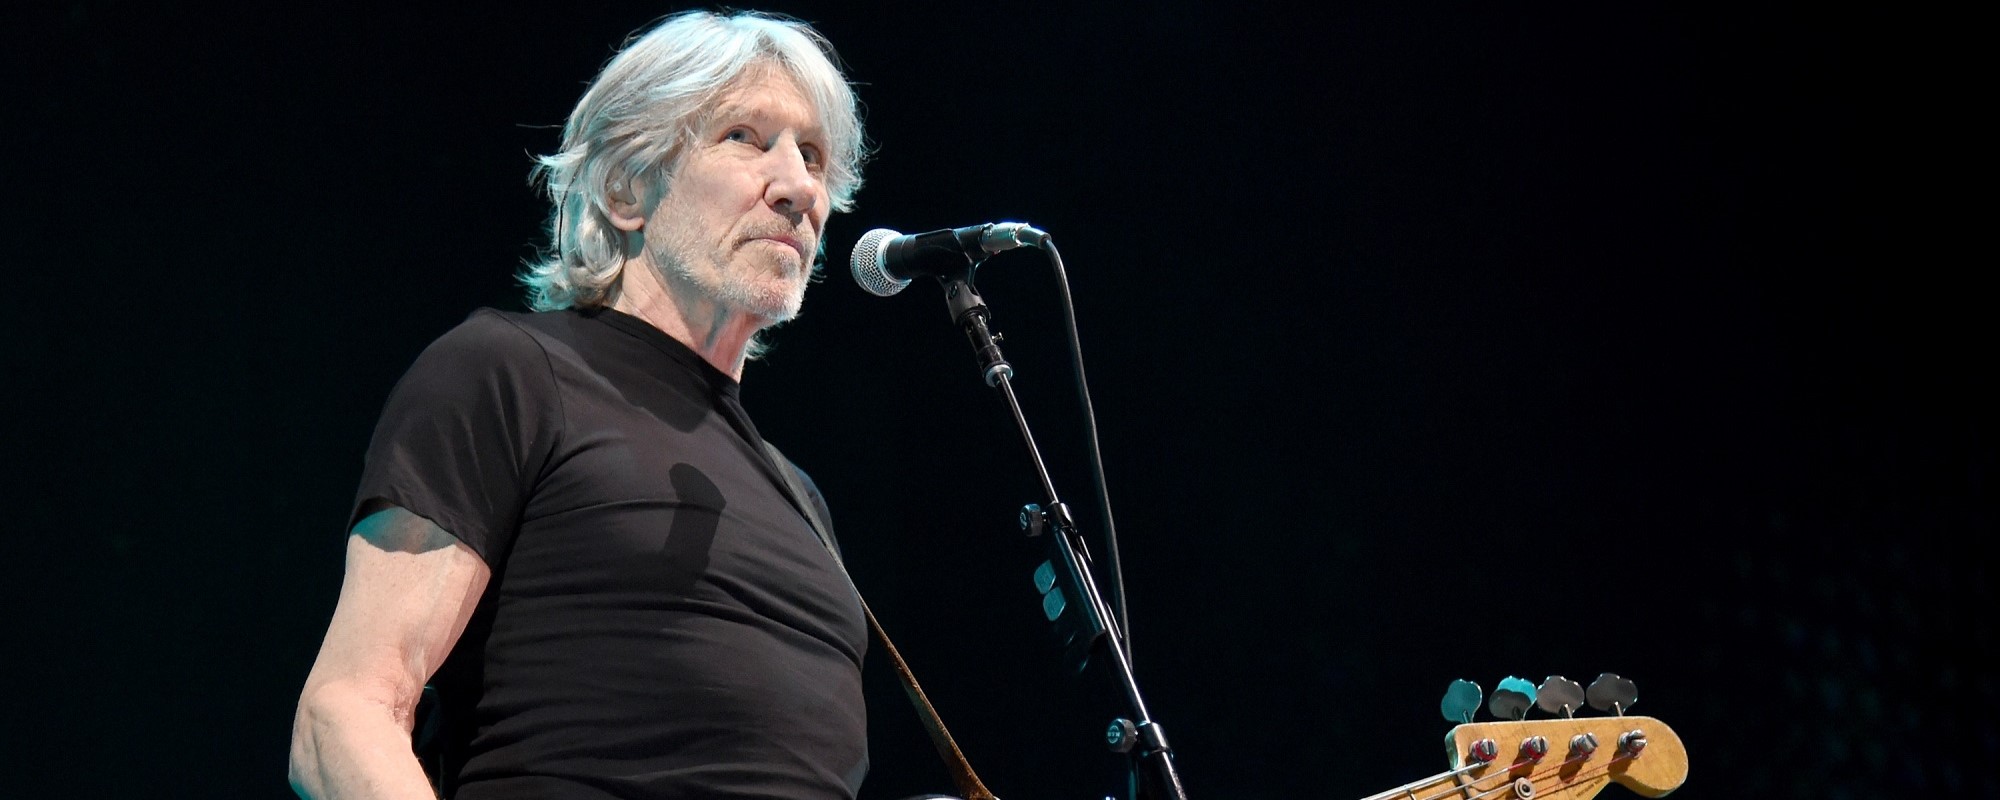 BMG Set to Part Ways with Roger Waters over Ex-Pink Floyd Member’s Controversial Comments: Report